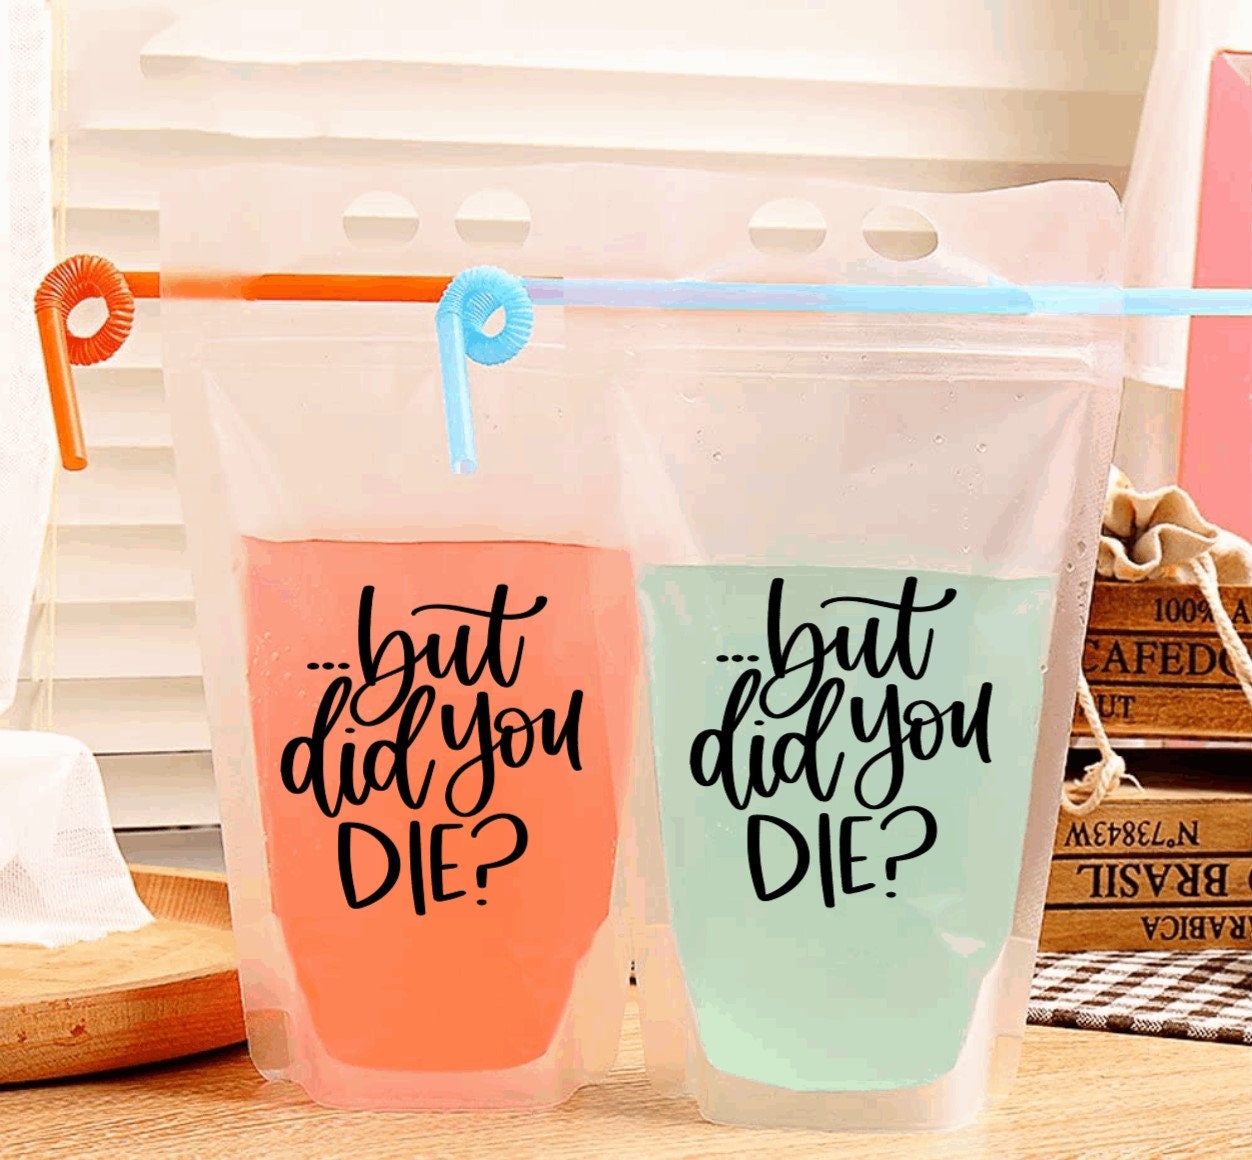 Adult Drink Pouches – That's What {Che} Said